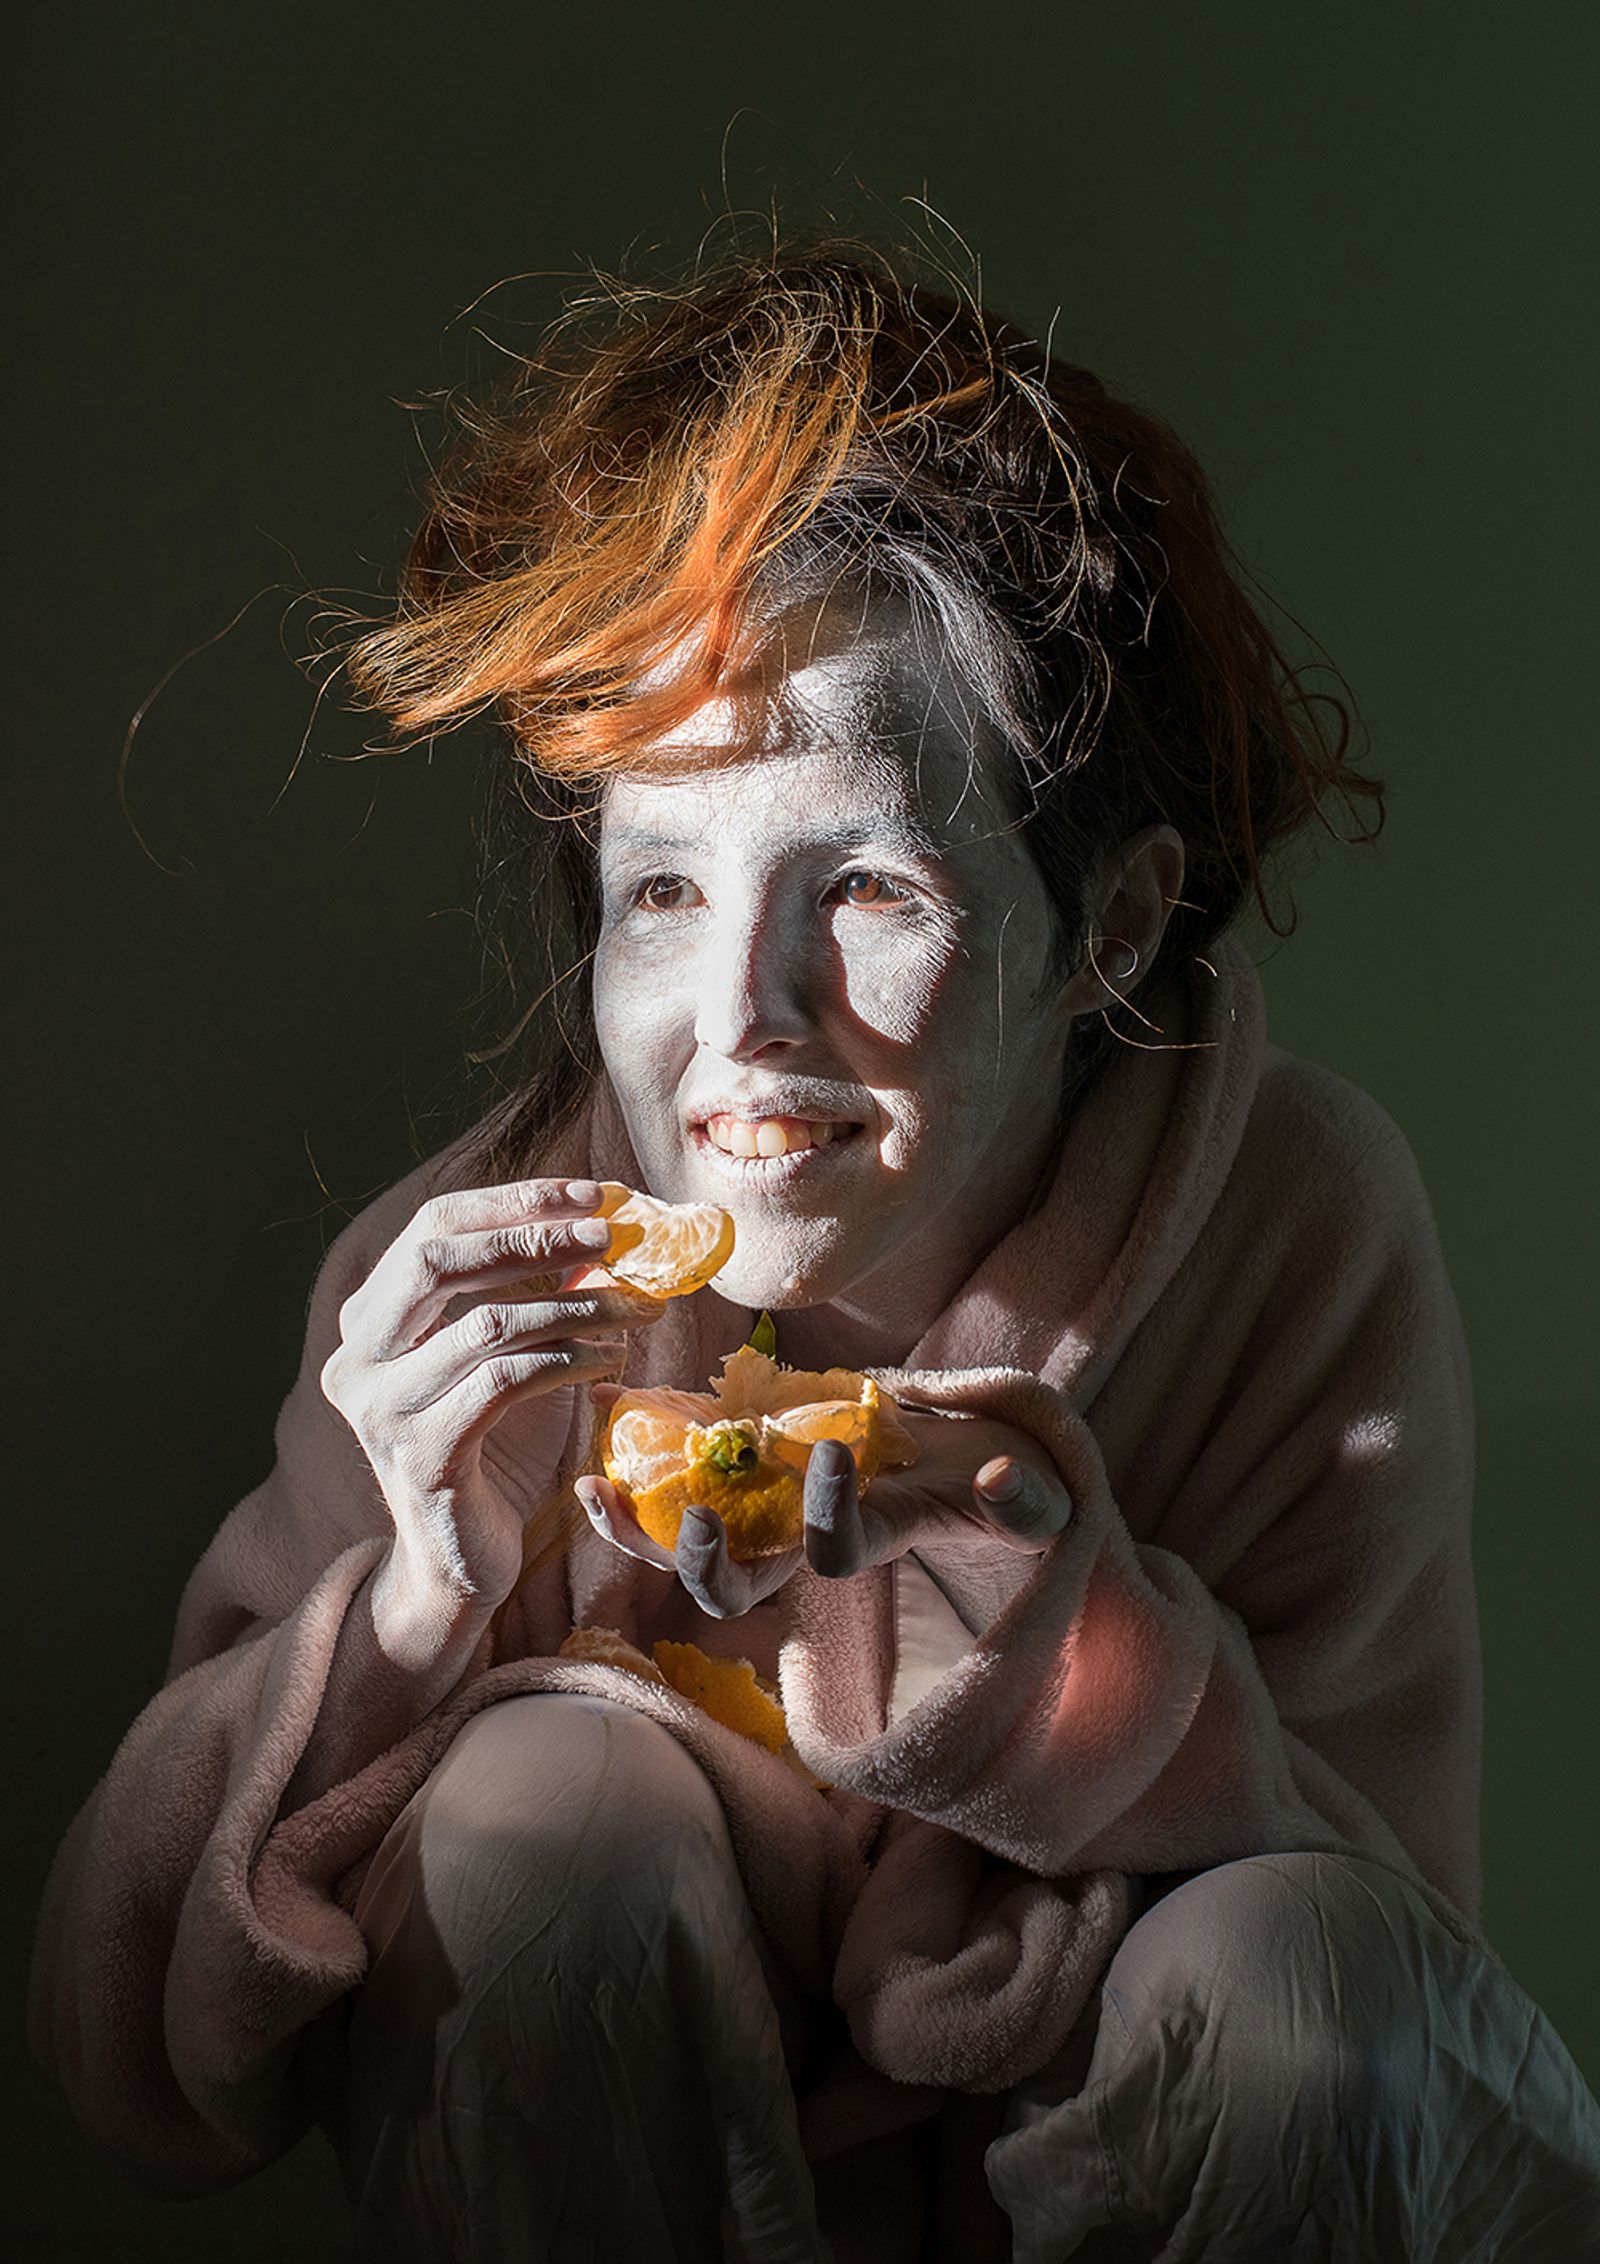 © Camila Falcão - Nube, photographer and performing artist, performes with a tangerine